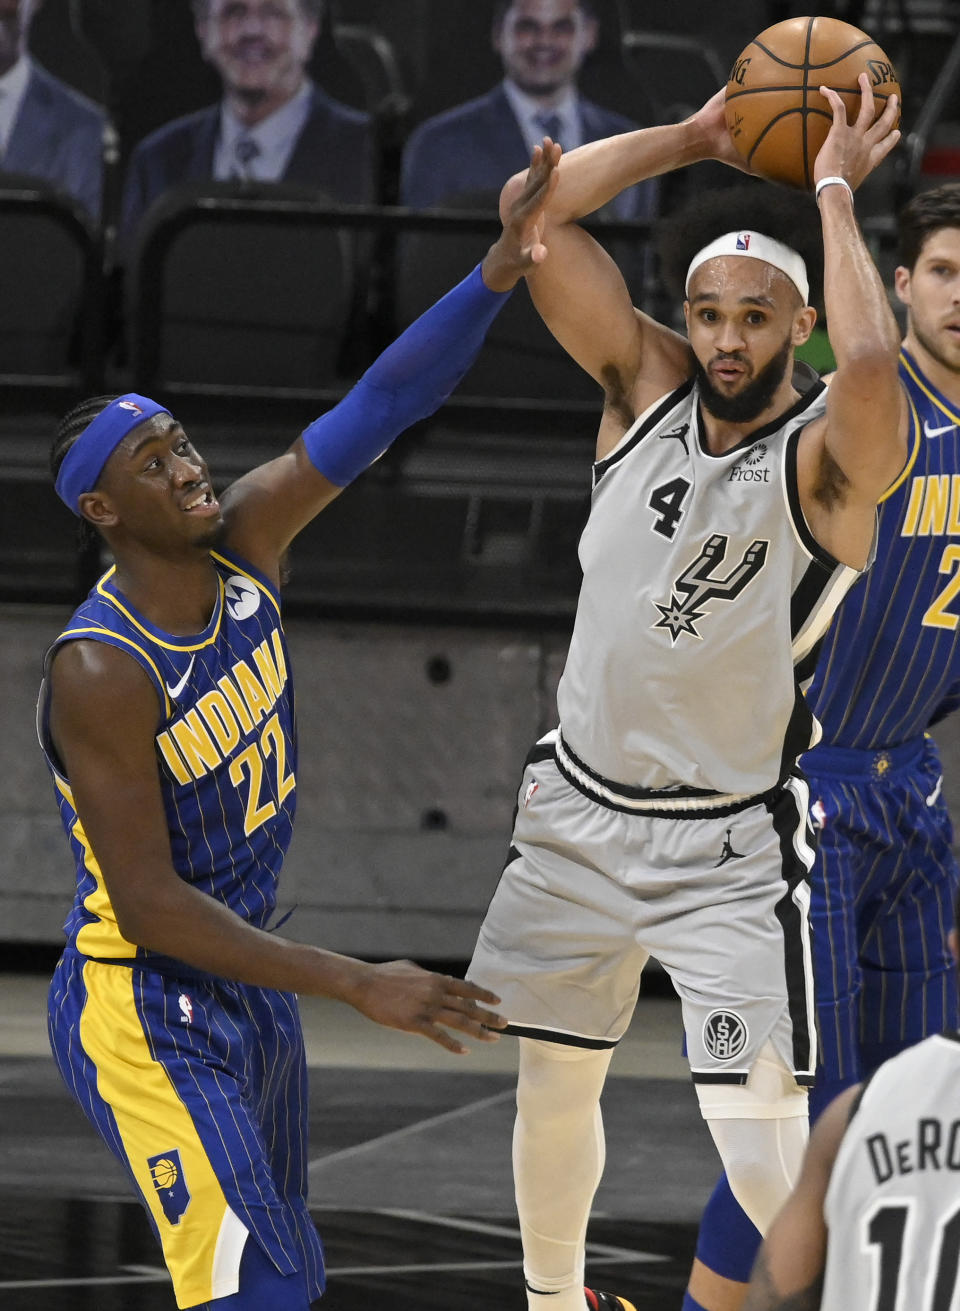 San Antonio Spurs' Derrick White (4) looks to pass as he is defended by Indiana Pacers' Caris LeVert during the second half of an NBA basketball game on Saturday, April 3, 2021, in San Antonio. (AP Photo/Darren Abate)